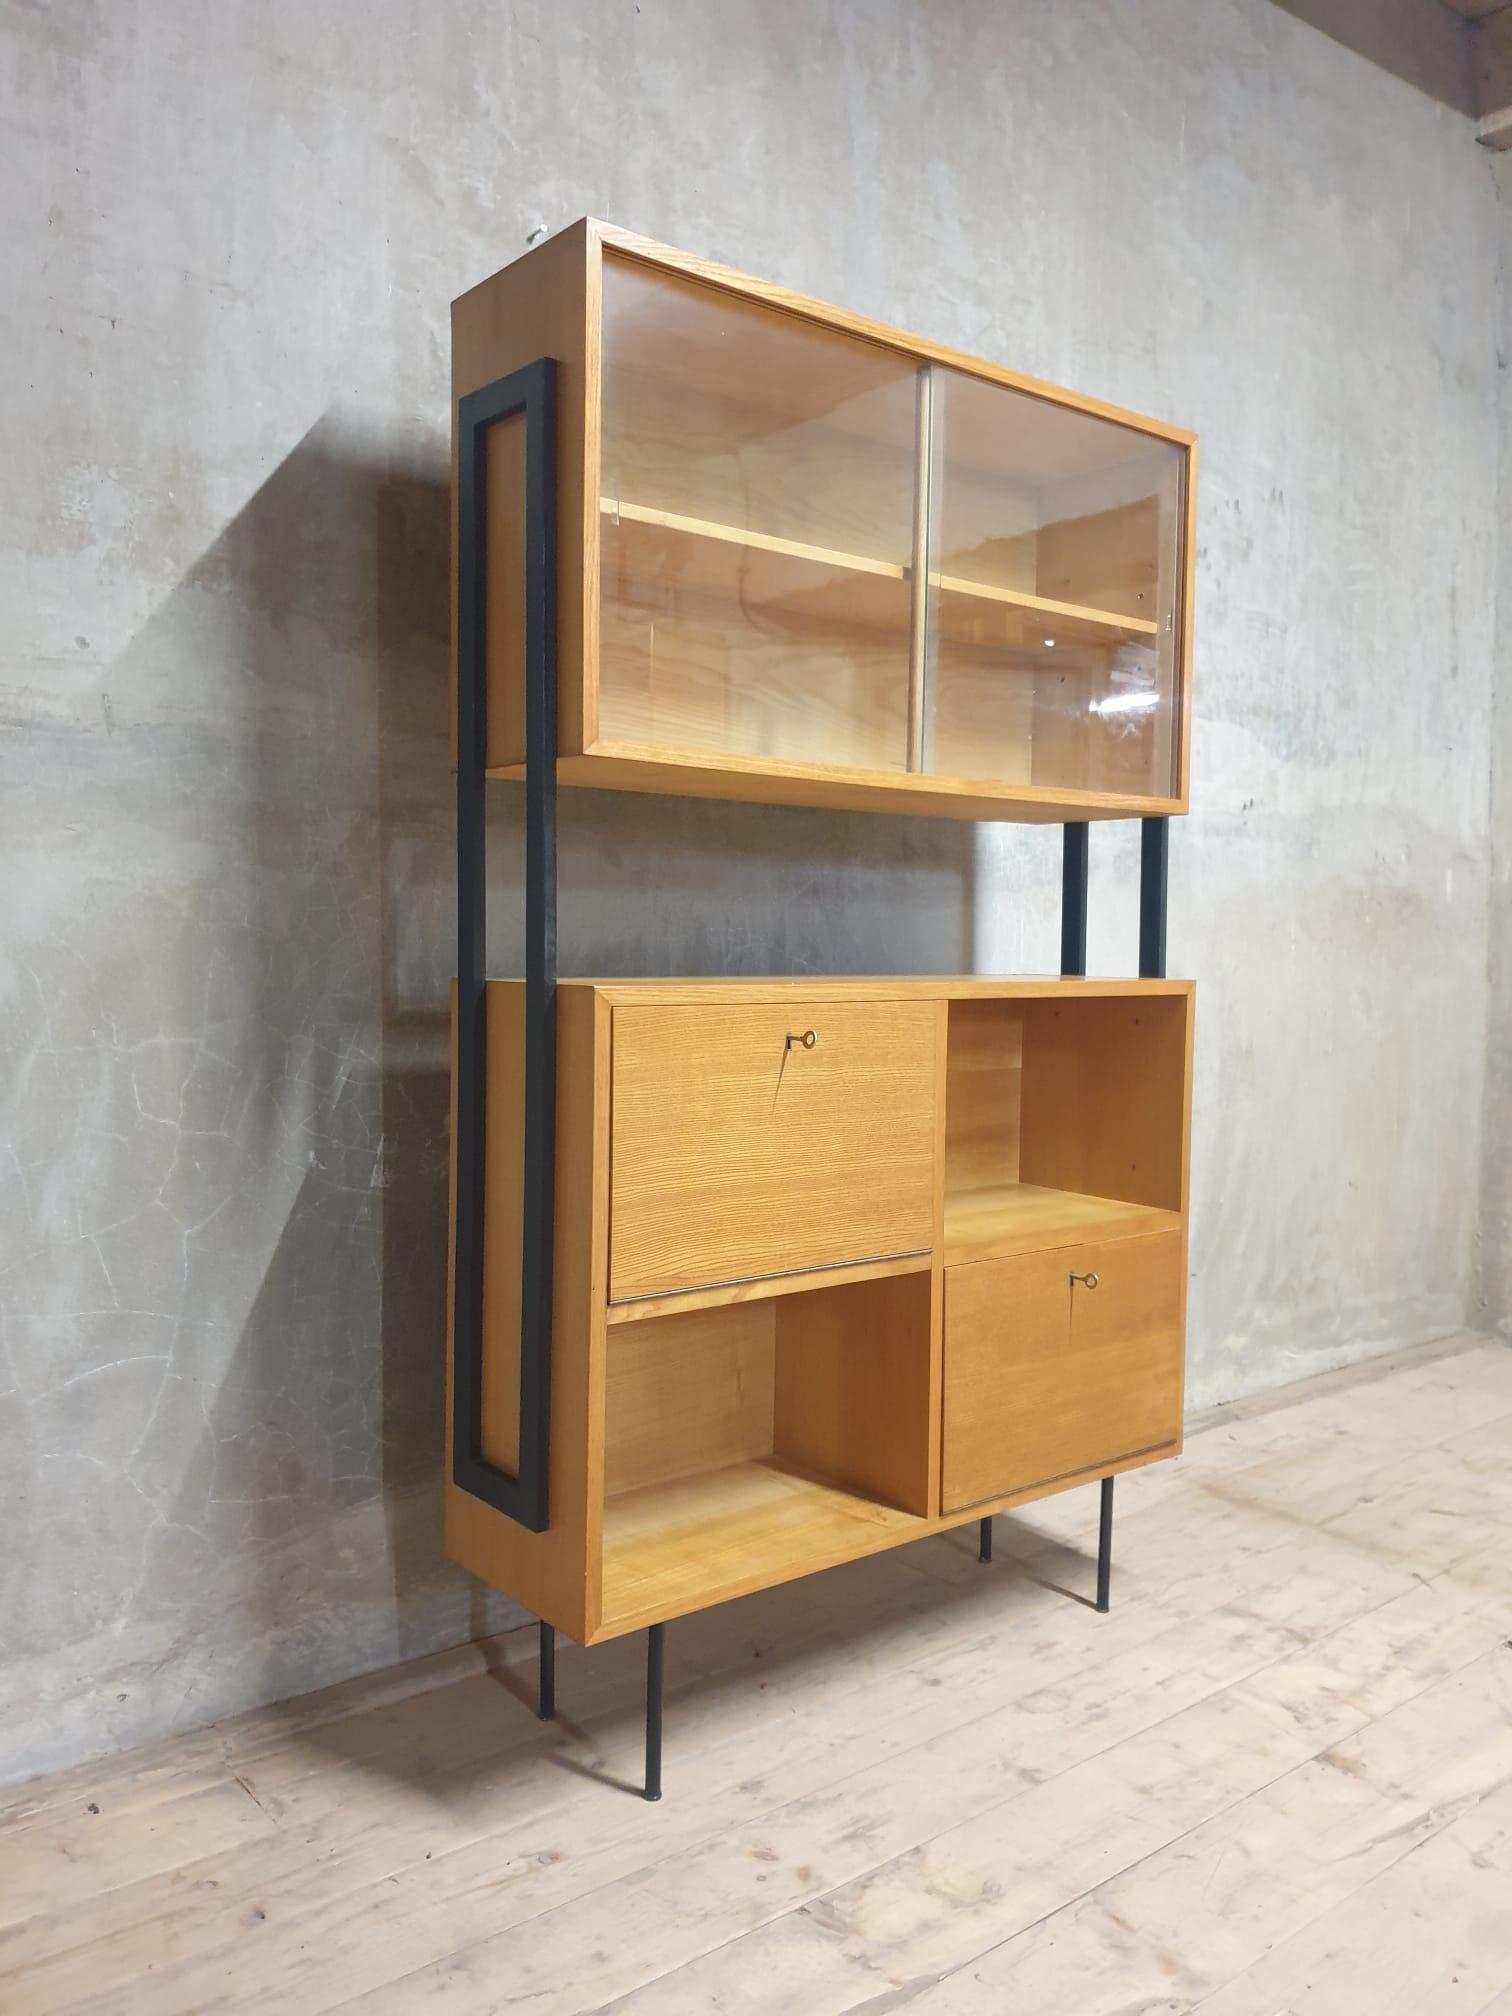 Mid century bookcase from the 1960´s. It was made in the former Czechoslovakia.
It´s made of beechwood, ashwood, plywood and metal.
In good preserved condition, it shows signs of age and use.

Height: 163 cm

lenght: 103 cm

Depth: 30 cm